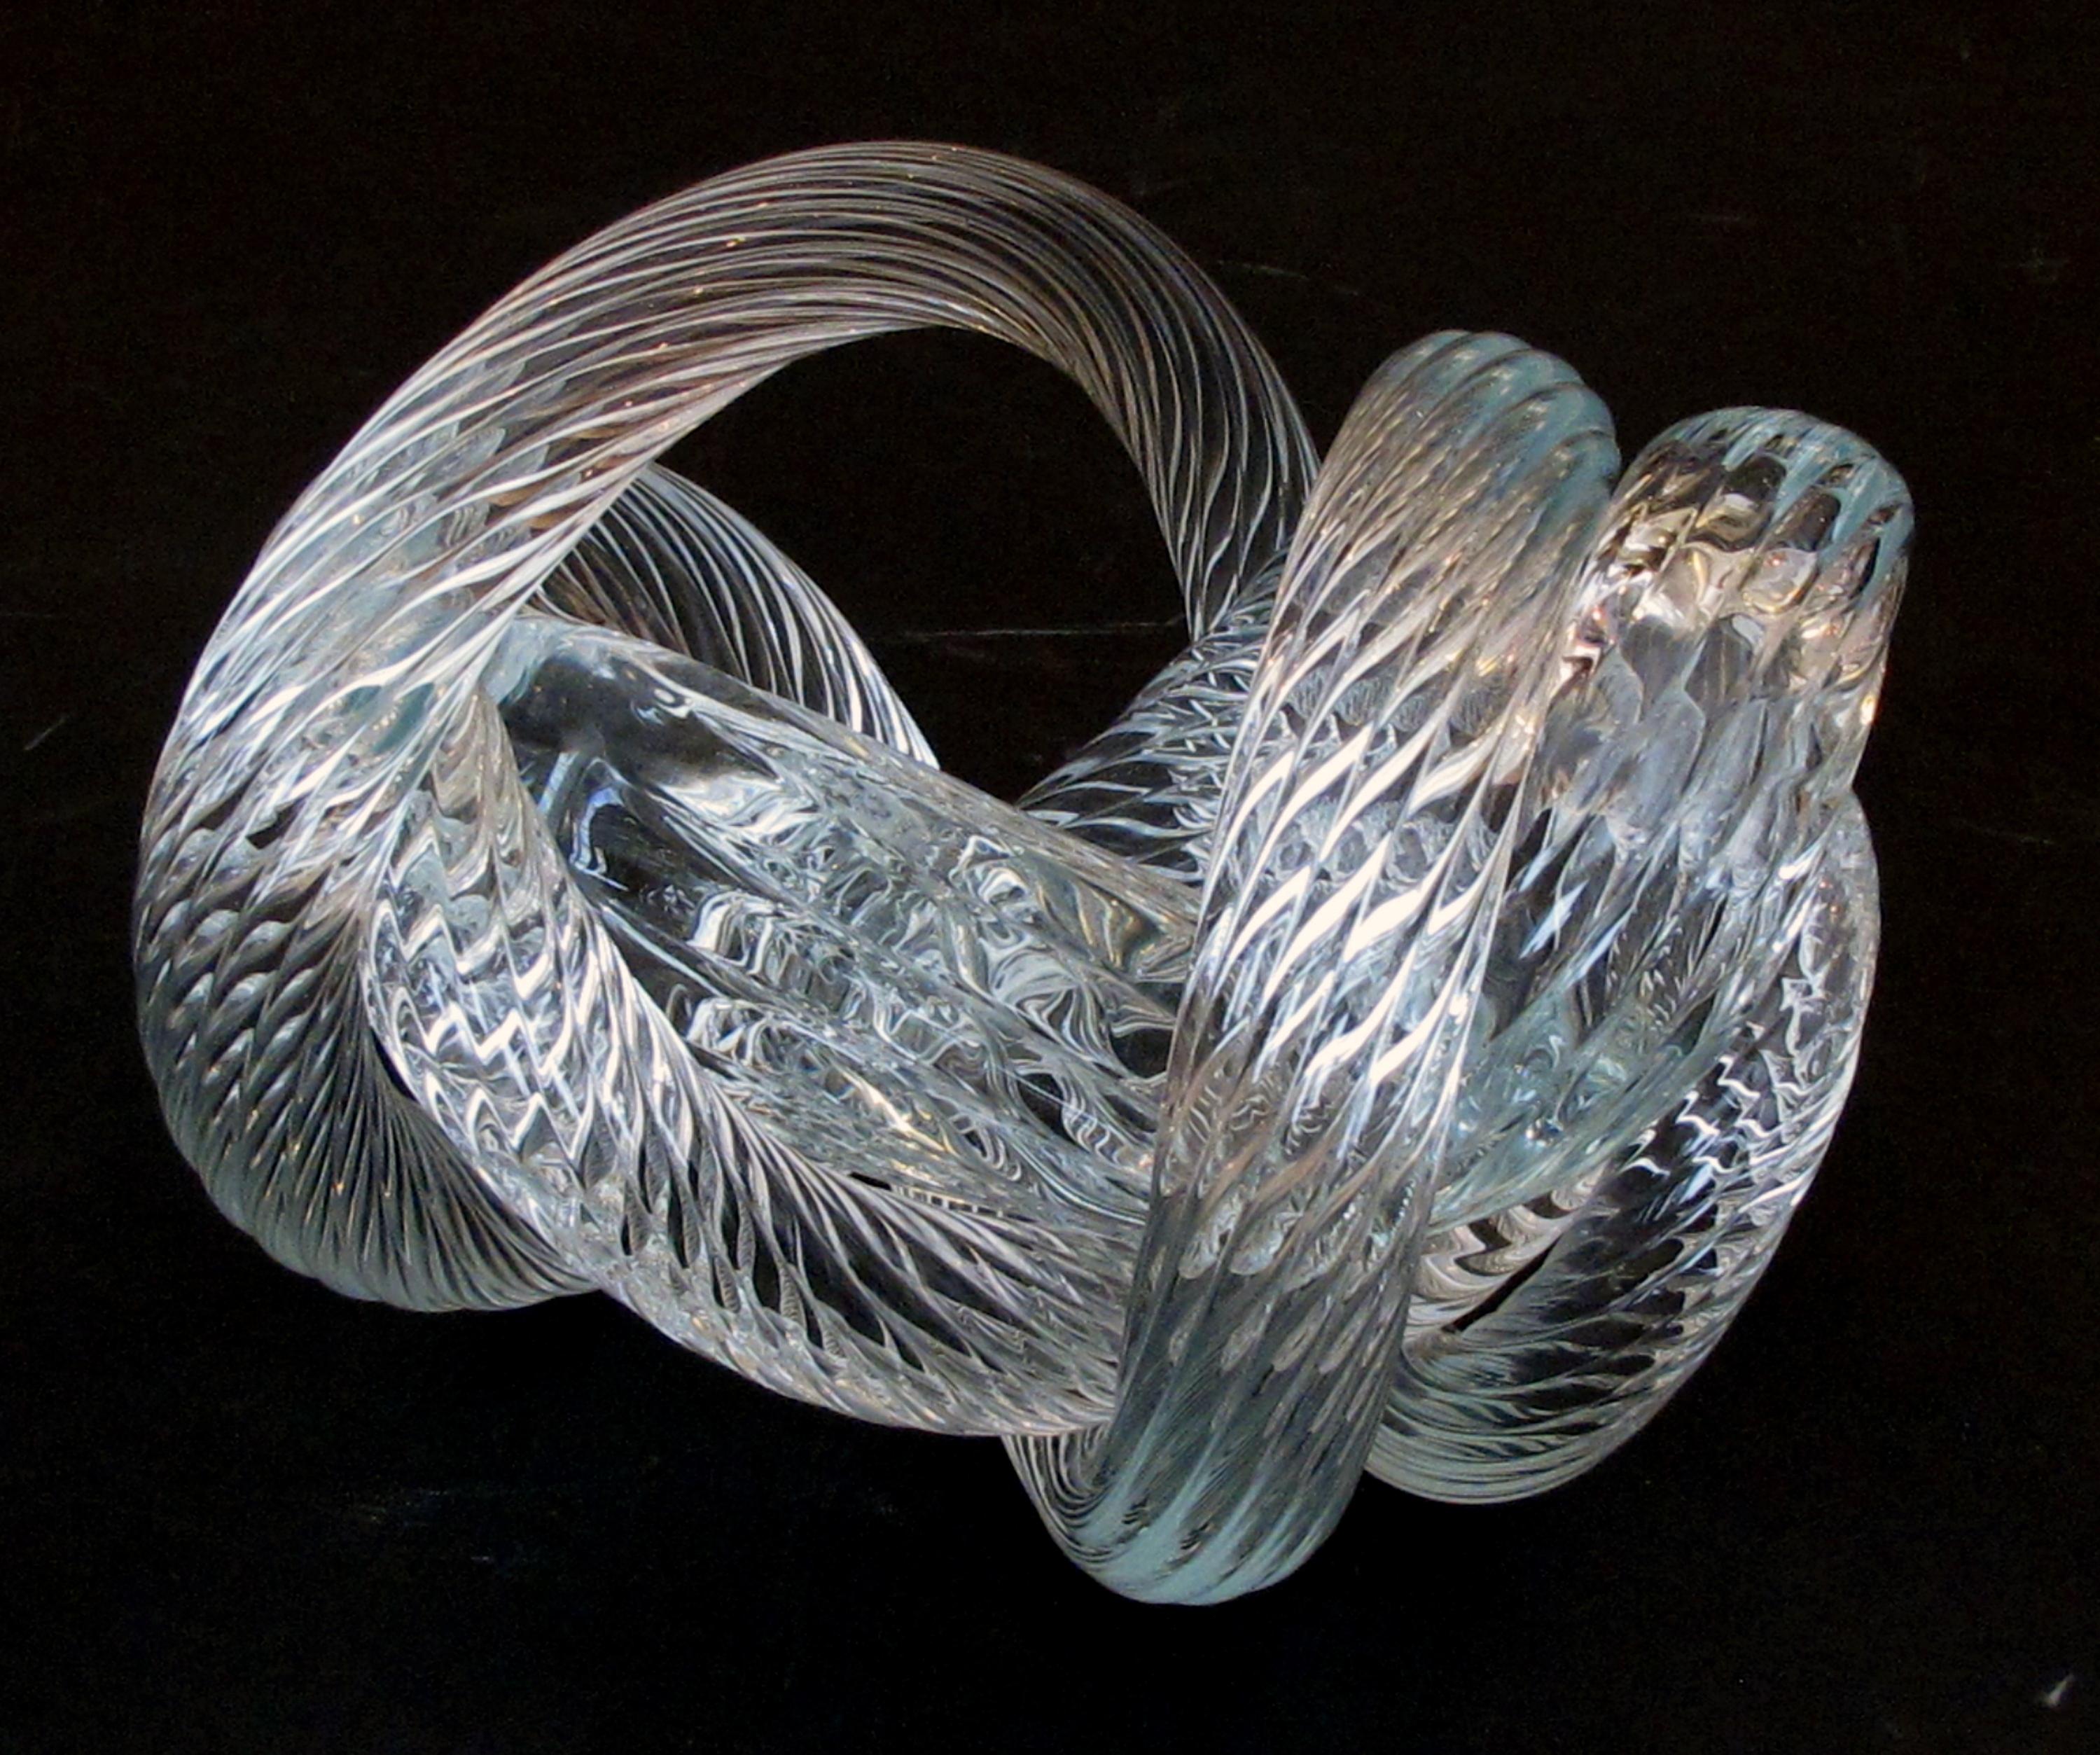 A well-crafted and heavy glass rope knot by Fusion Z Glassworks; with acid etched signature; the thickly-modeled sculpture depicting an intertwining rope in shimmering glass.